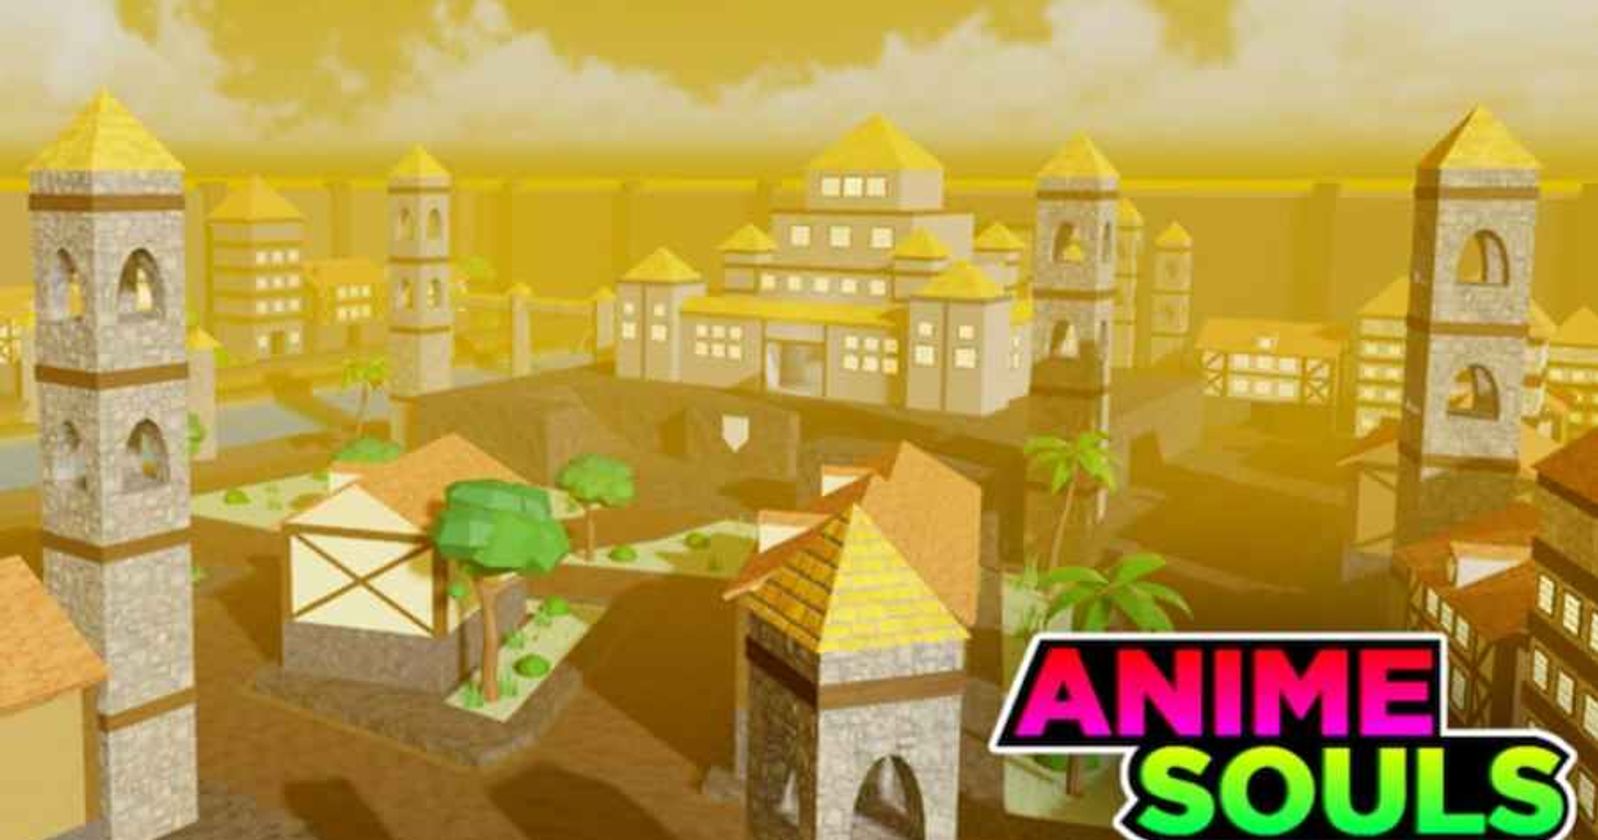 ALL NEW *SECRET* UPDATE CODES in ANIME SOULS SIMULATOR CODES! (Roblox Anime  Souls Simulator Codes) 